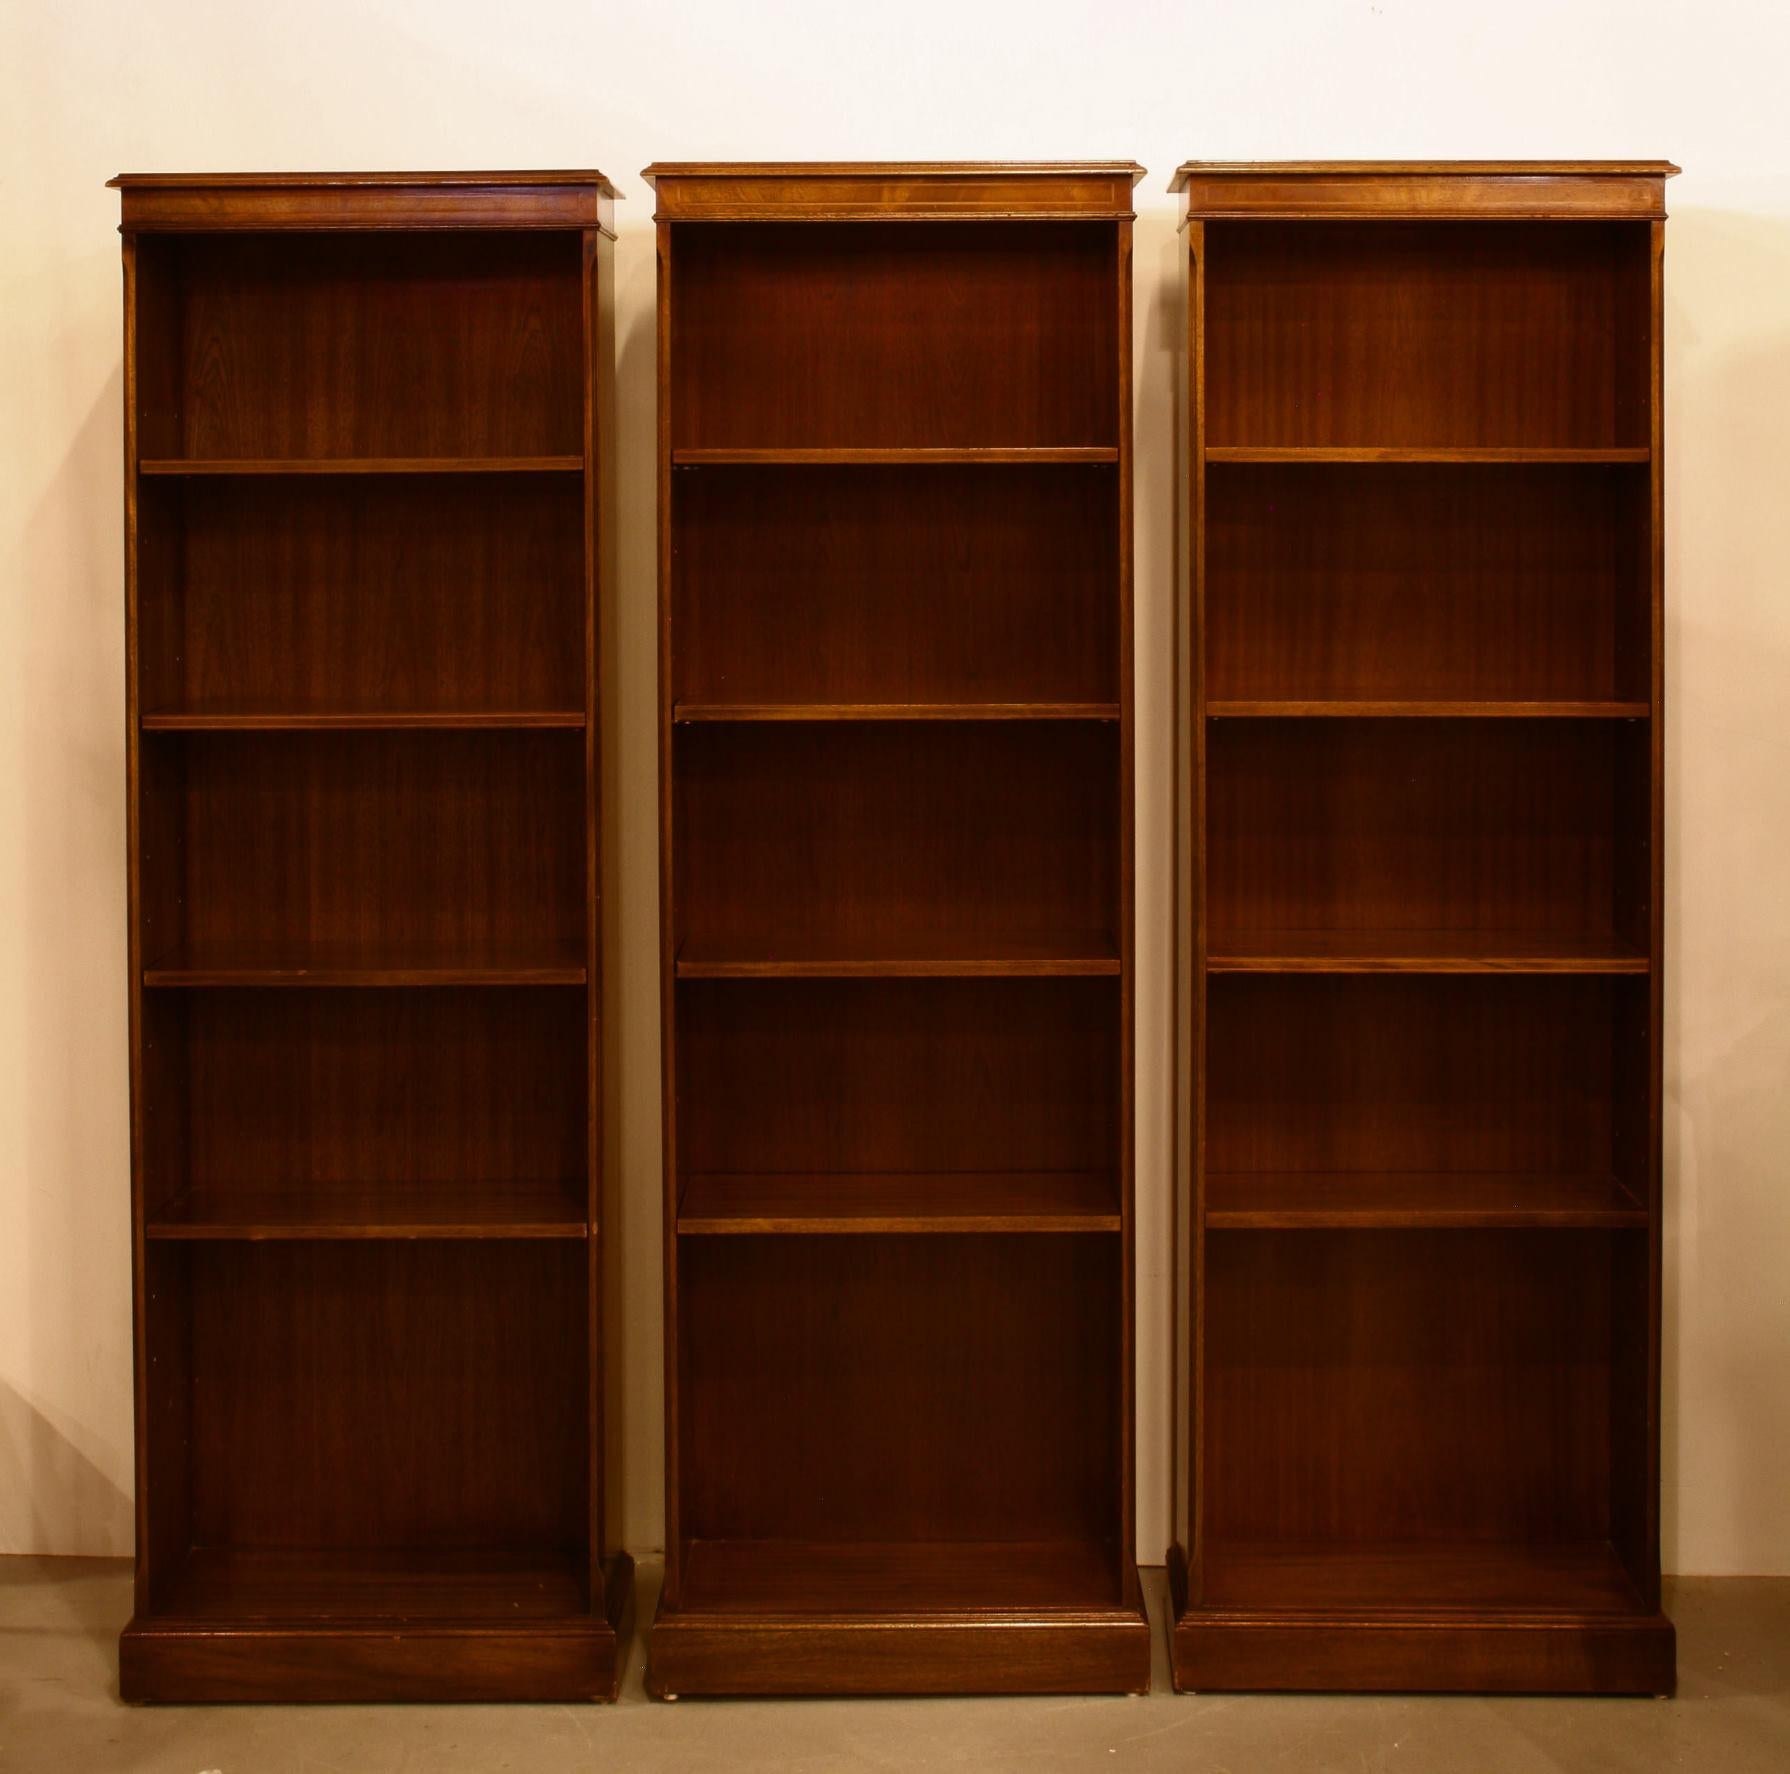 A lovely group of English bookcases with finely styled details. Crafted in mahogany, with string inlay on the shelf front edge.
Small in scale with lots of storage for books and collectables. Four adjustable shelves make these very flexible and